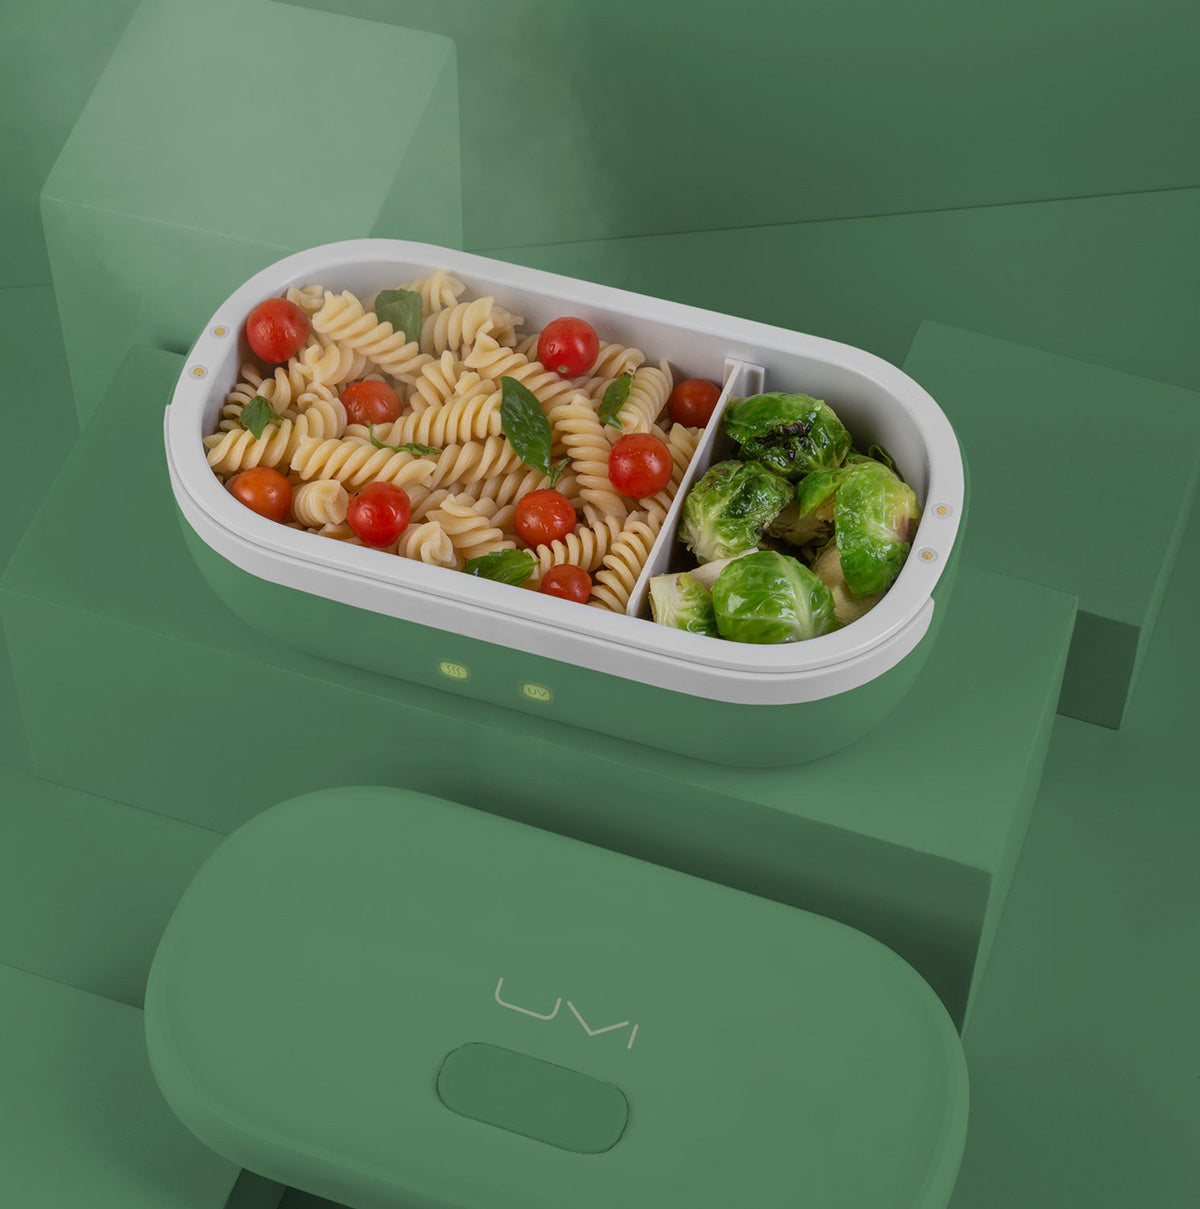 Hot Bento Food Container Internal Battery Powered Self-Heating